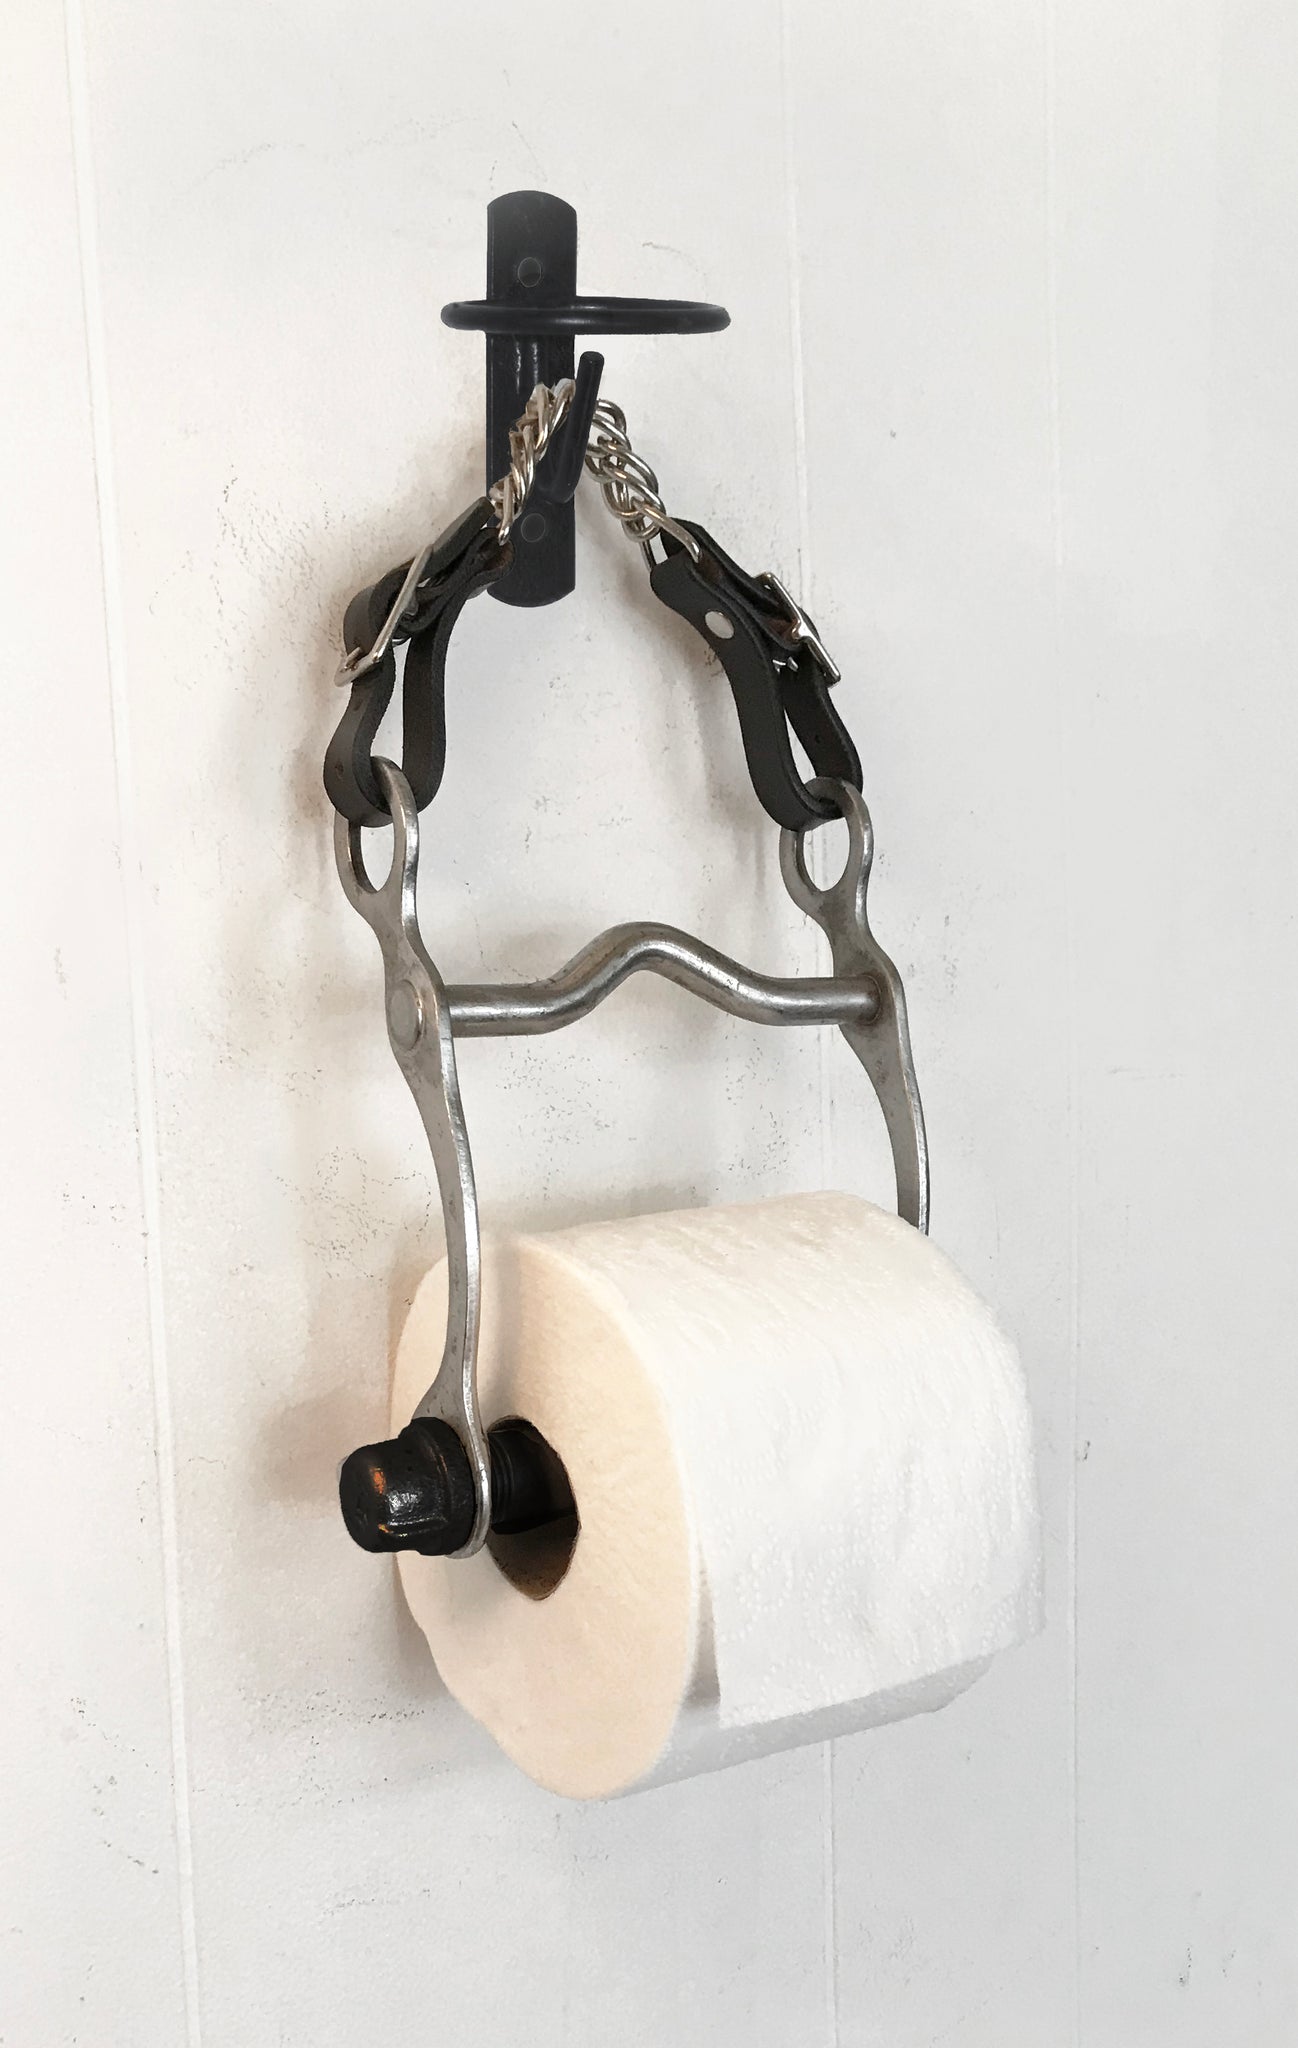 Paper Towel Holder / Kitchen Roll Holder From Leather, Wood